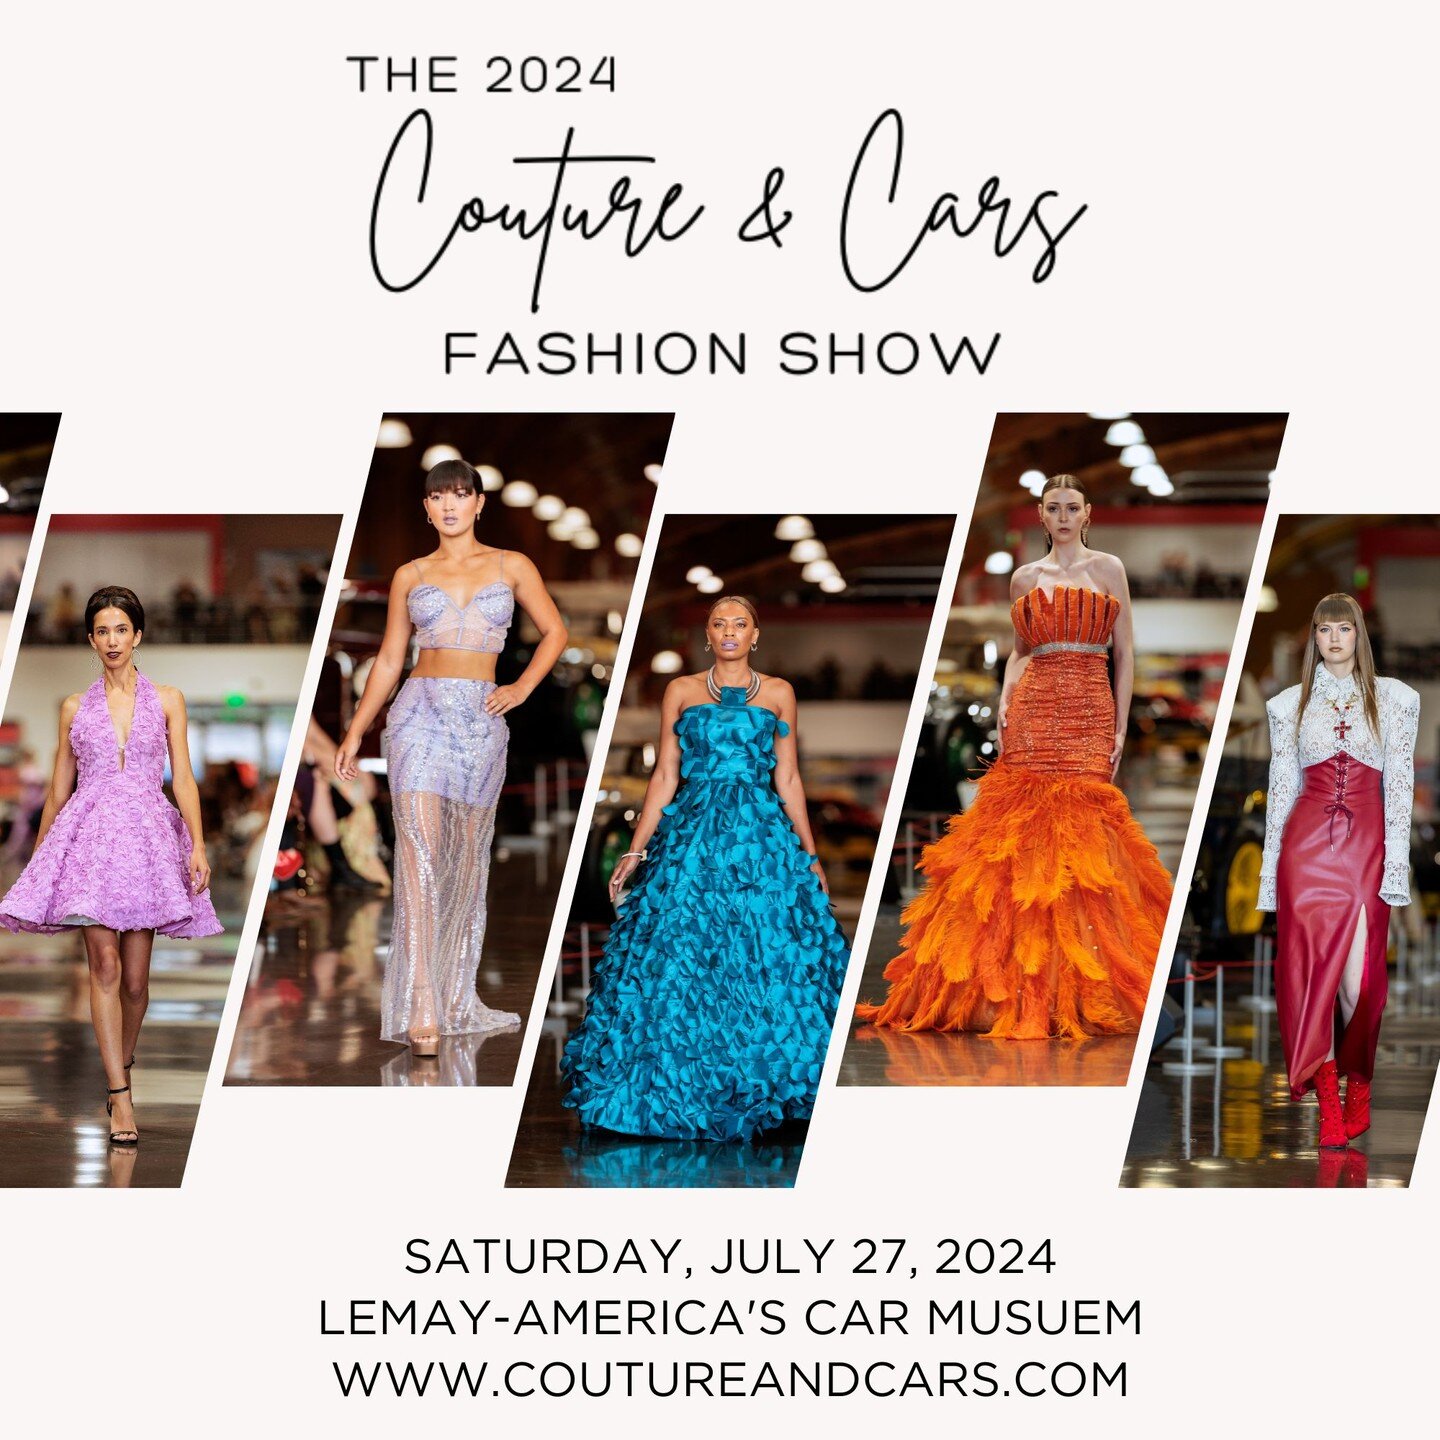 Get your tickets to the biggest fashion show of the summer! The 2024 Couture &amp; Cars Fashion Show is Saturday, July 27th at the @lemayacm in Tacoma, WA.

Link in Bio!

#coutureandcars2024 #coutureandcars #fashiondistrictnw #couturefashion #fashion